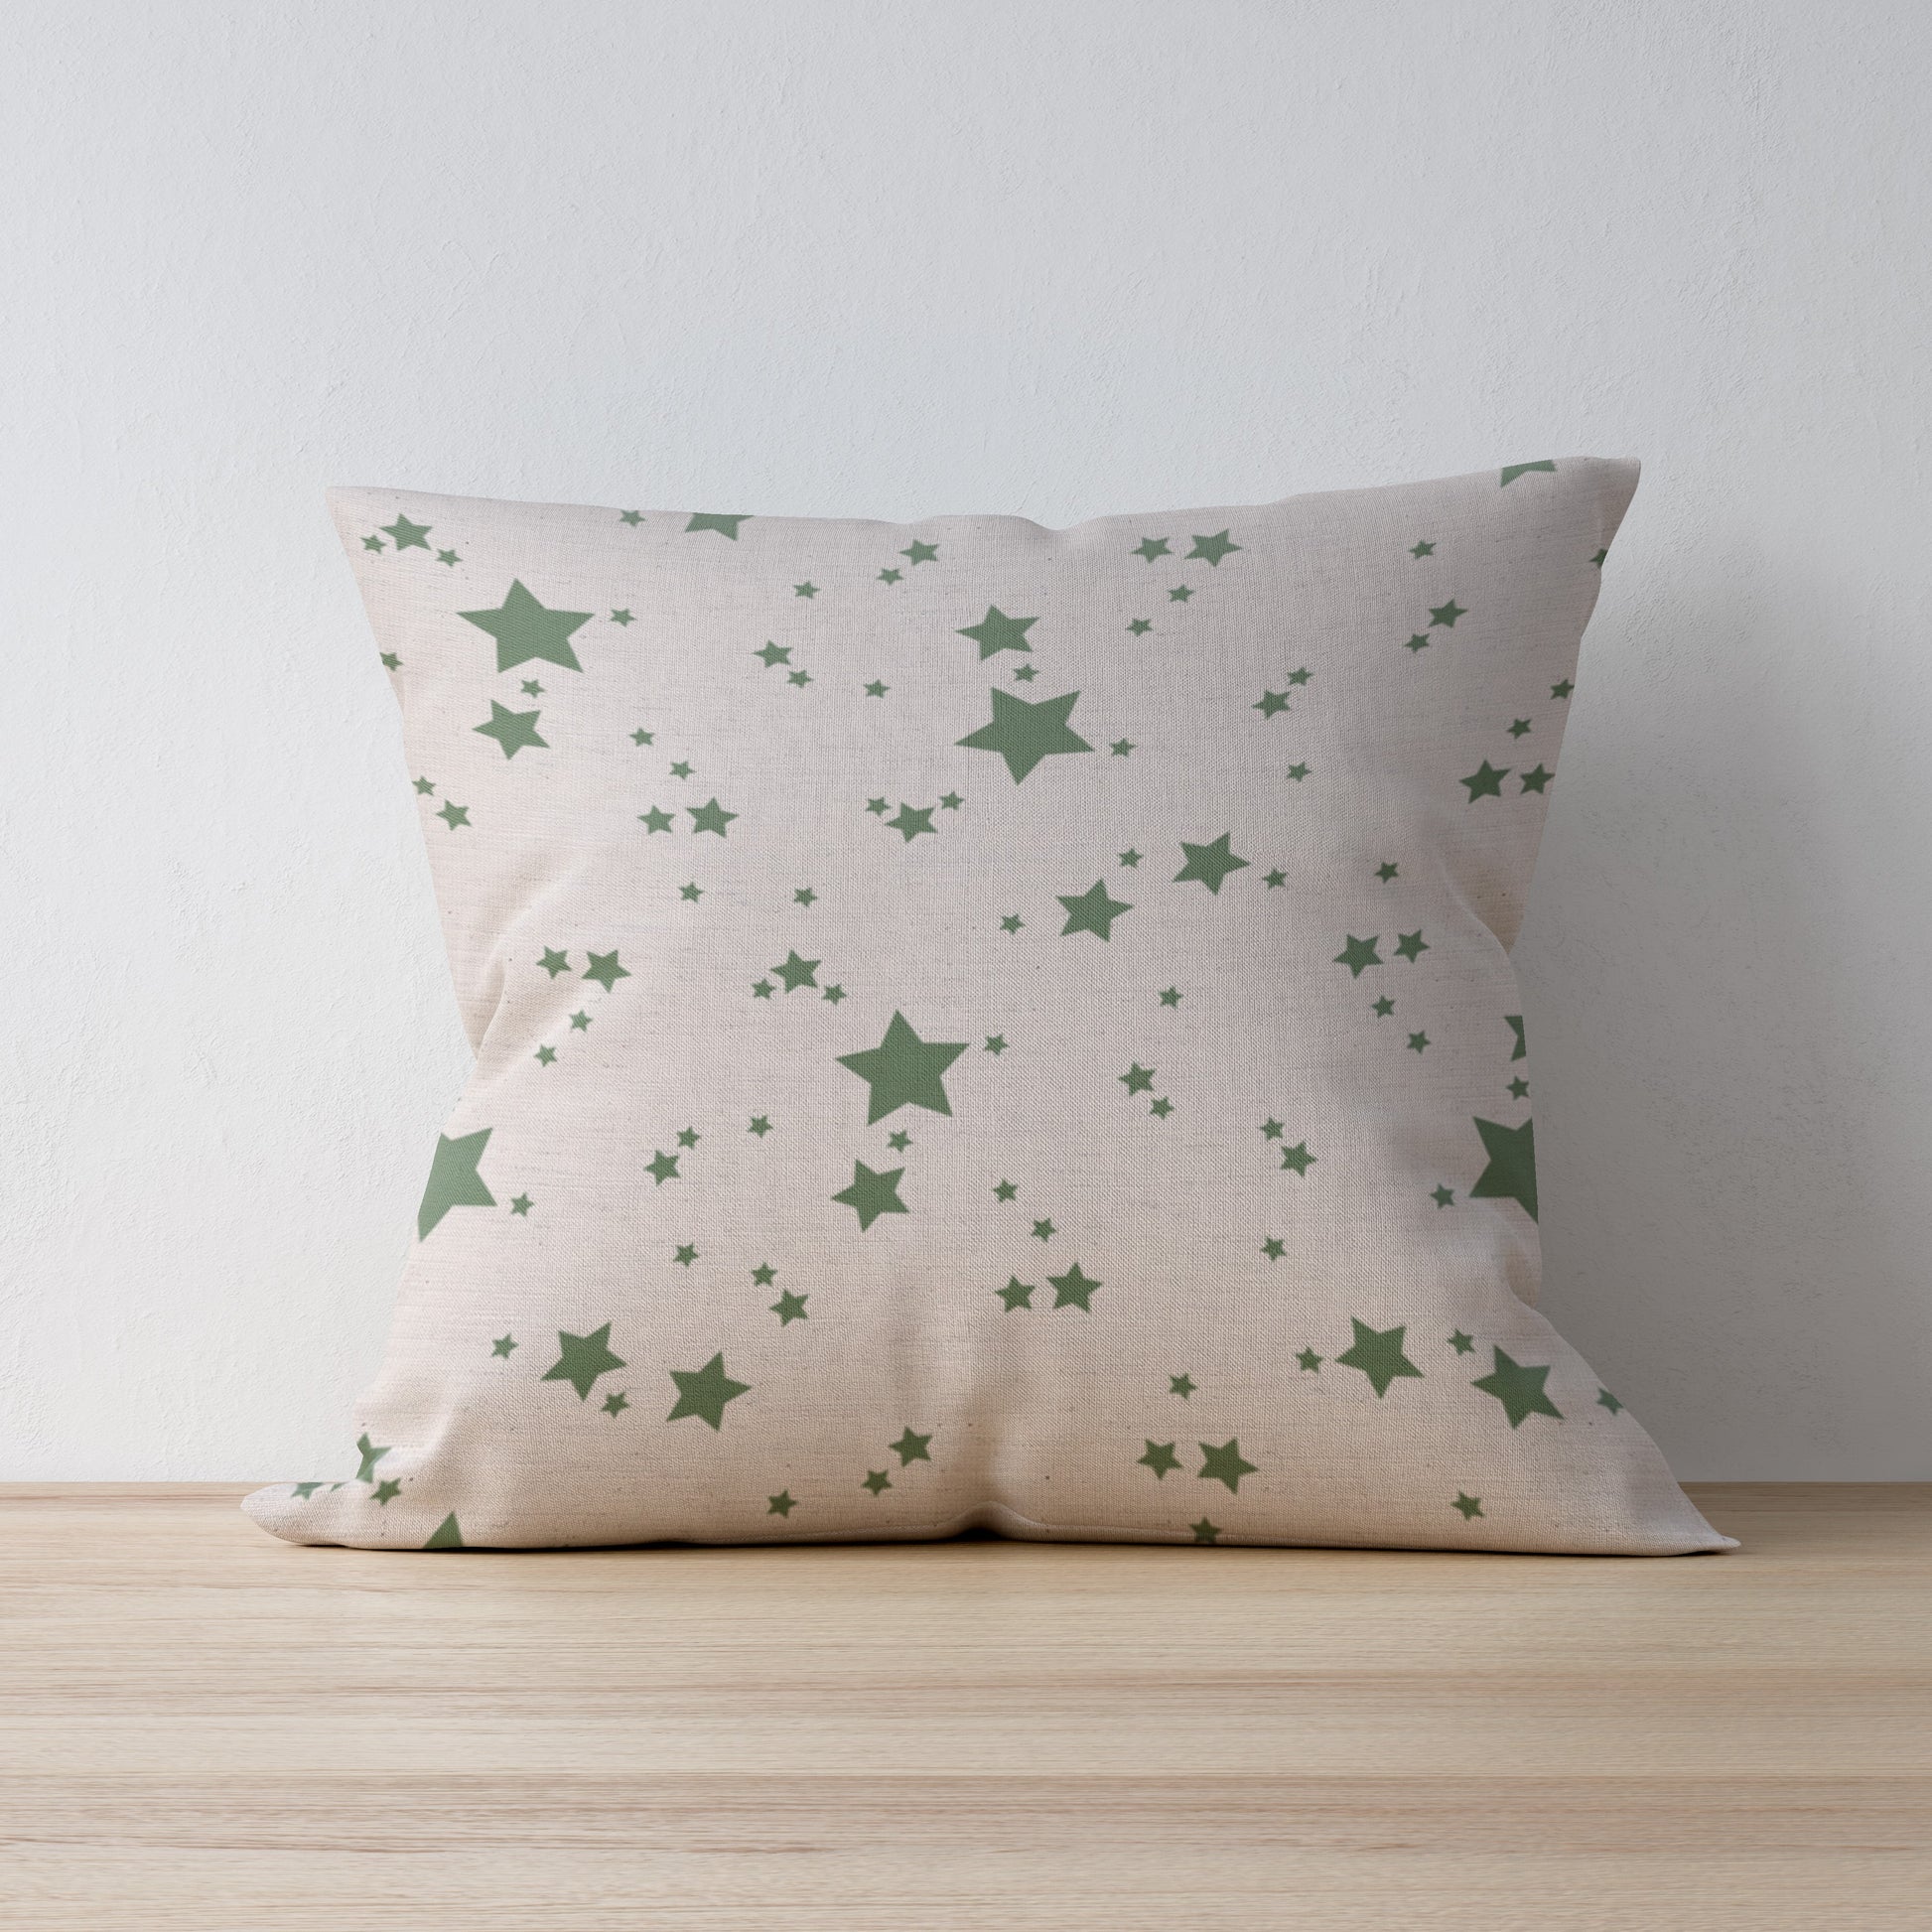 Dark Green star print cushion - handmade by F&B - linen cushion with duck feather inserts available in 16", 18" and 20" cushions